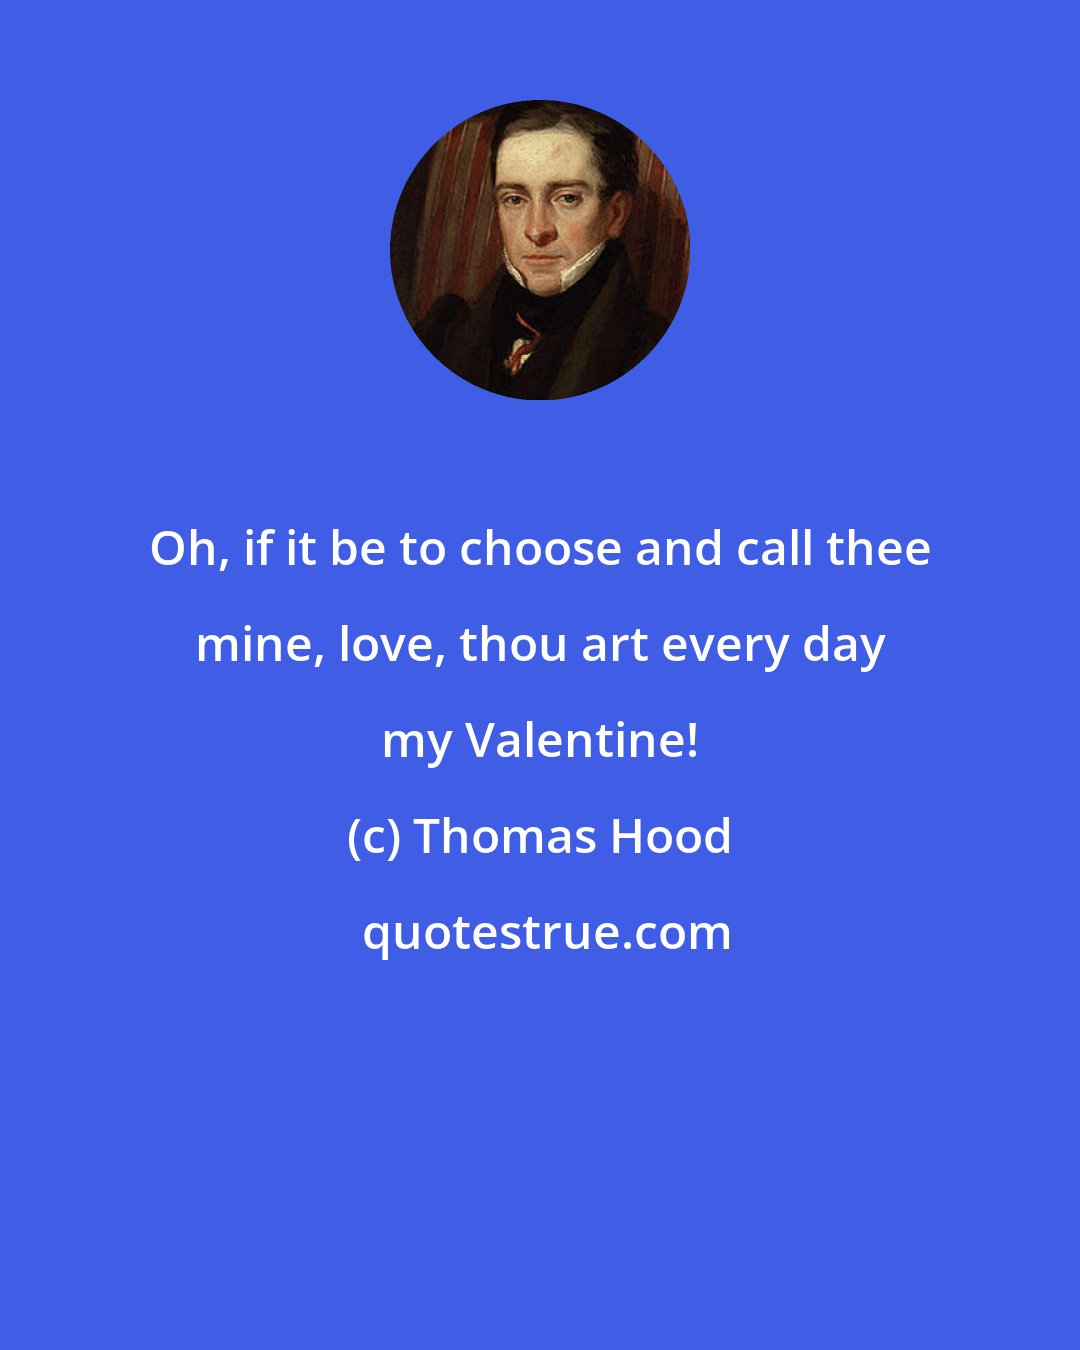 Thomas Hood: Oh, if it be to choose and call thee mine, love, thou art every day my Valentine!